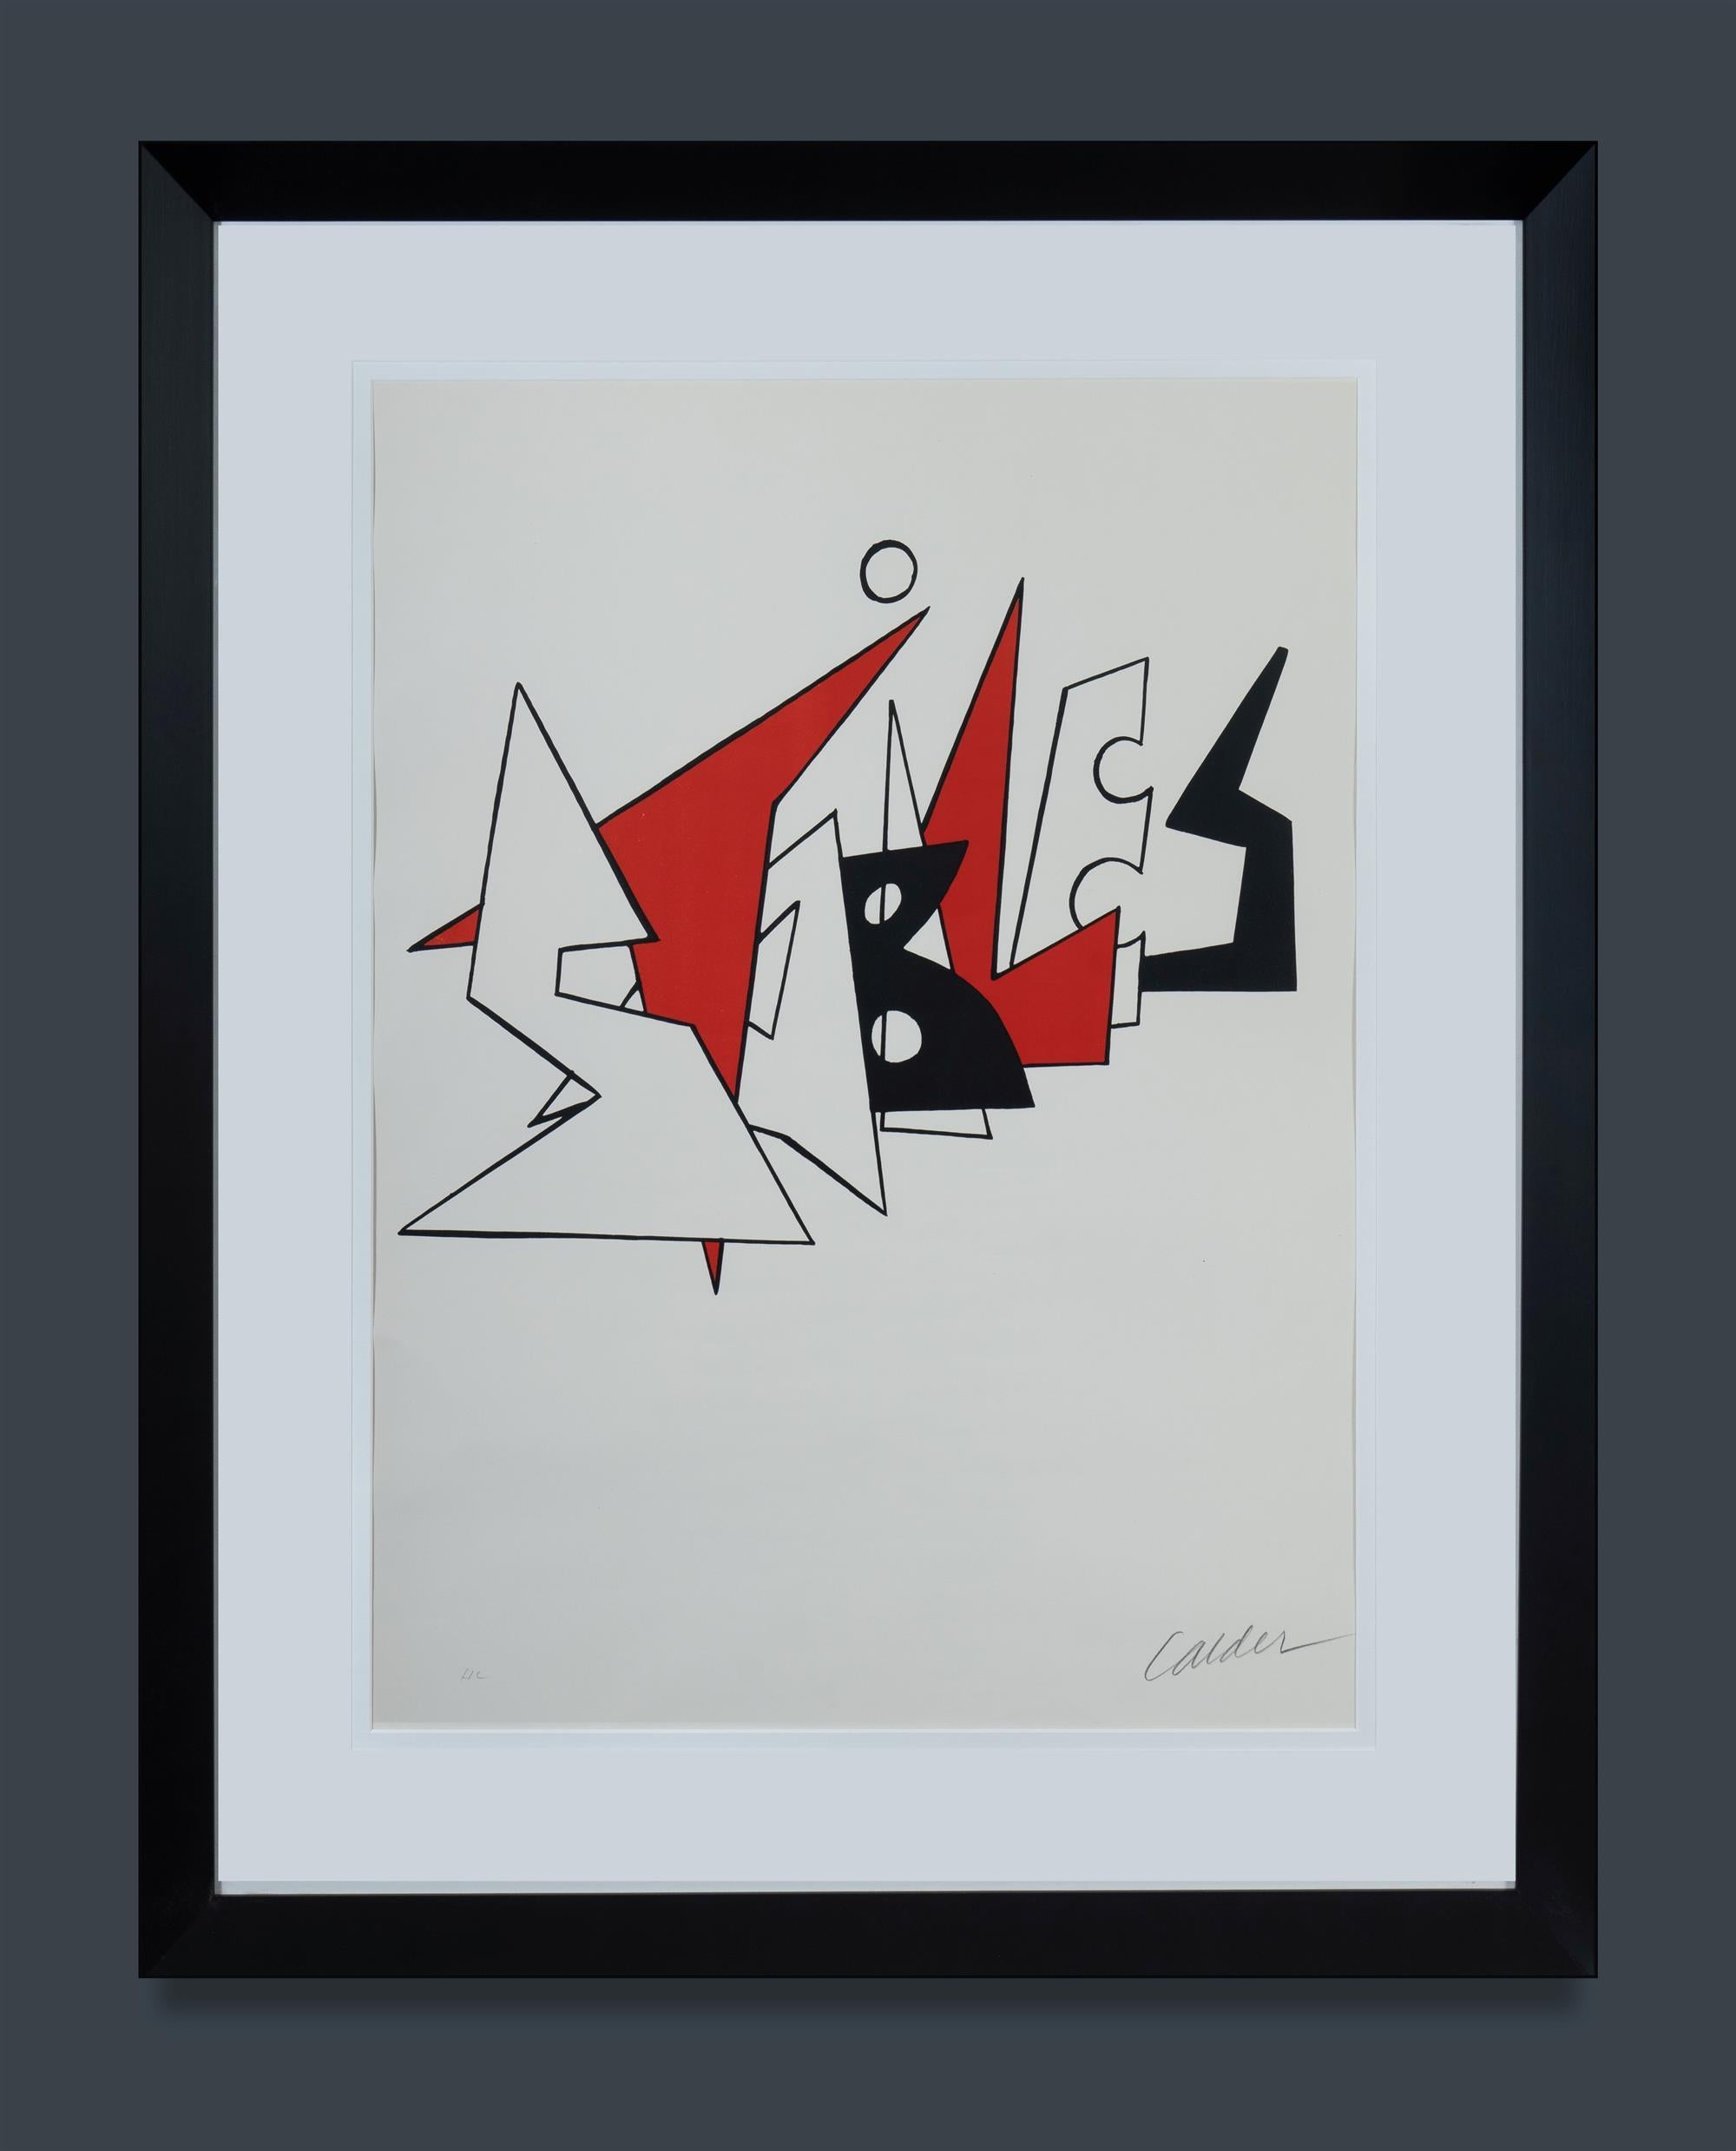 Alexander Calder 
'Stabiles,' 1963.
Signed in pencil lower right.
Lithograph in Colours H.C.
Published by Maeght, Paris
Image: 70 x 51 cm 
Frame: 94.5 x 75 x 5 cm